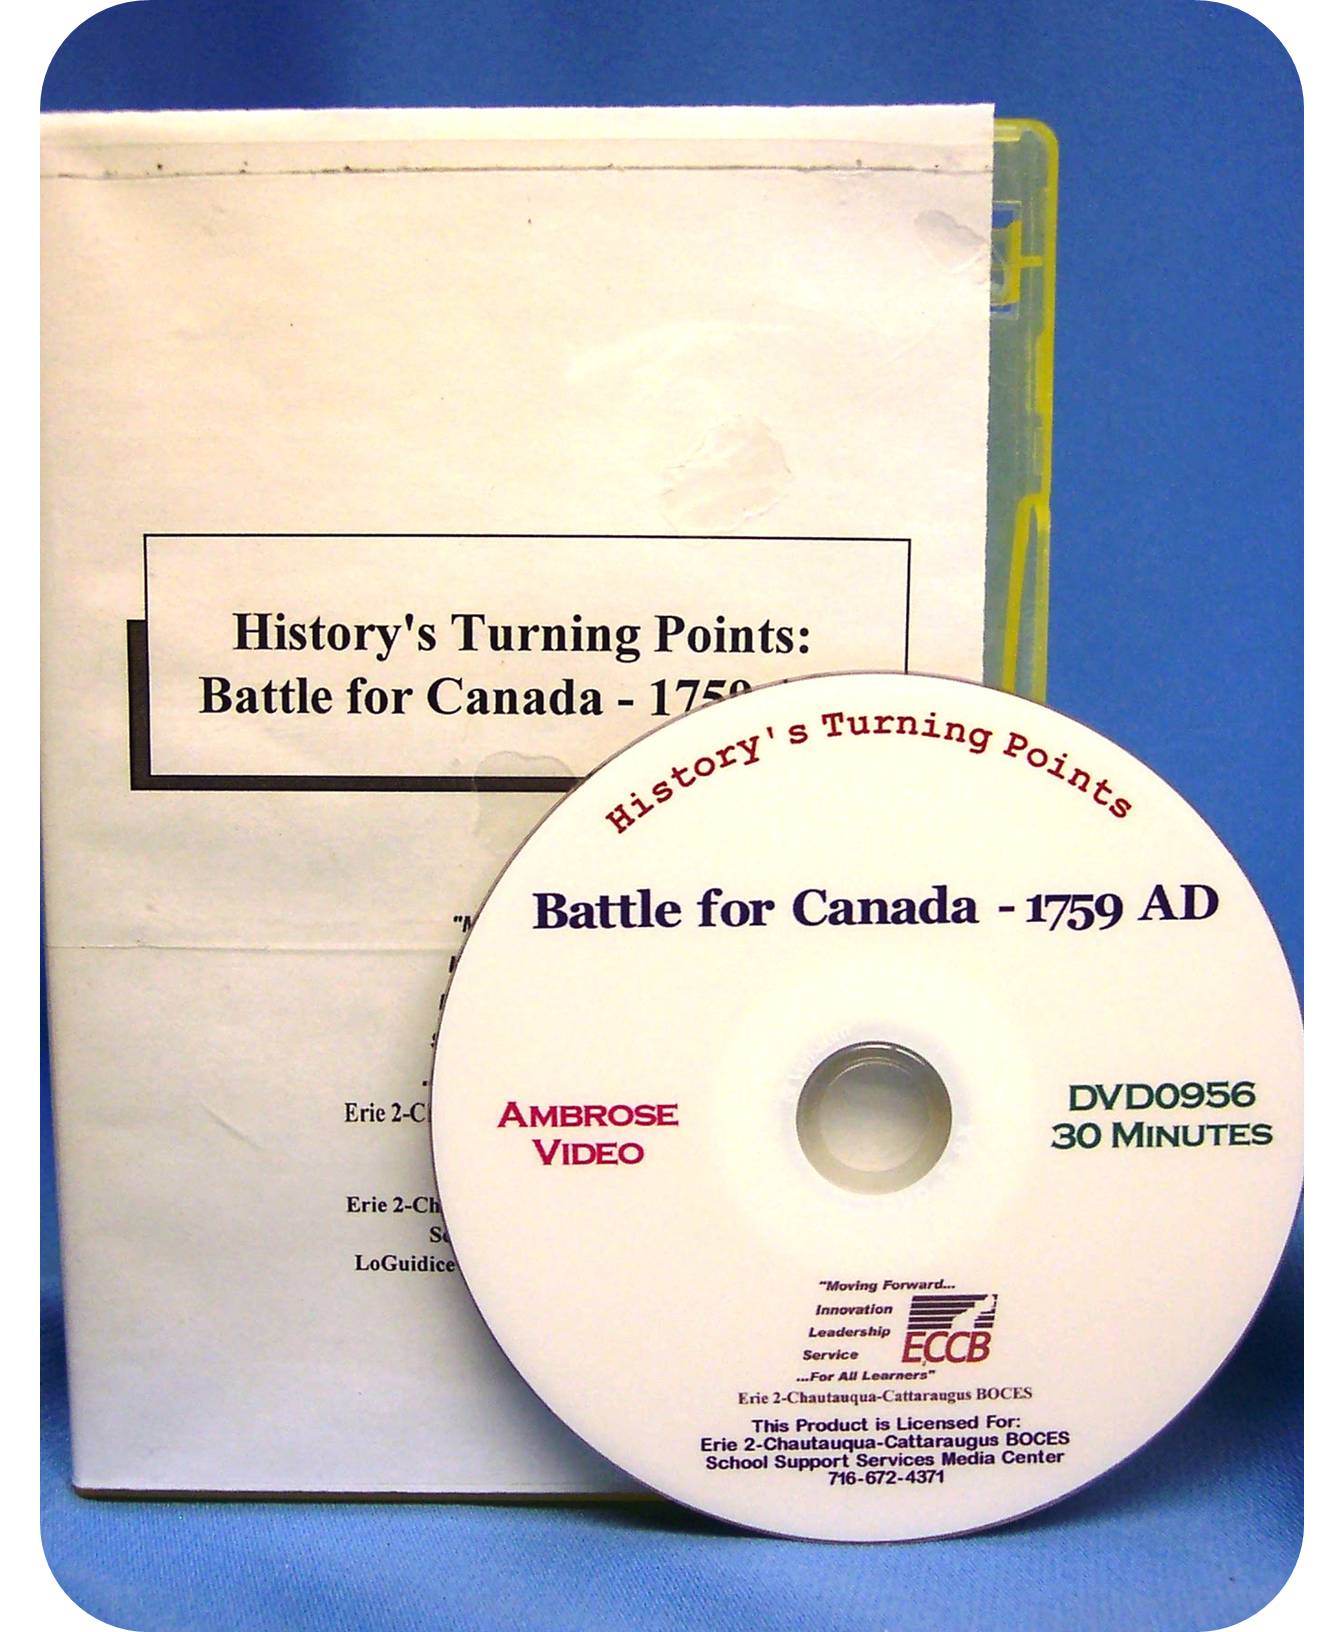 History's Turning Points: Battle for Canada - 1759 AD